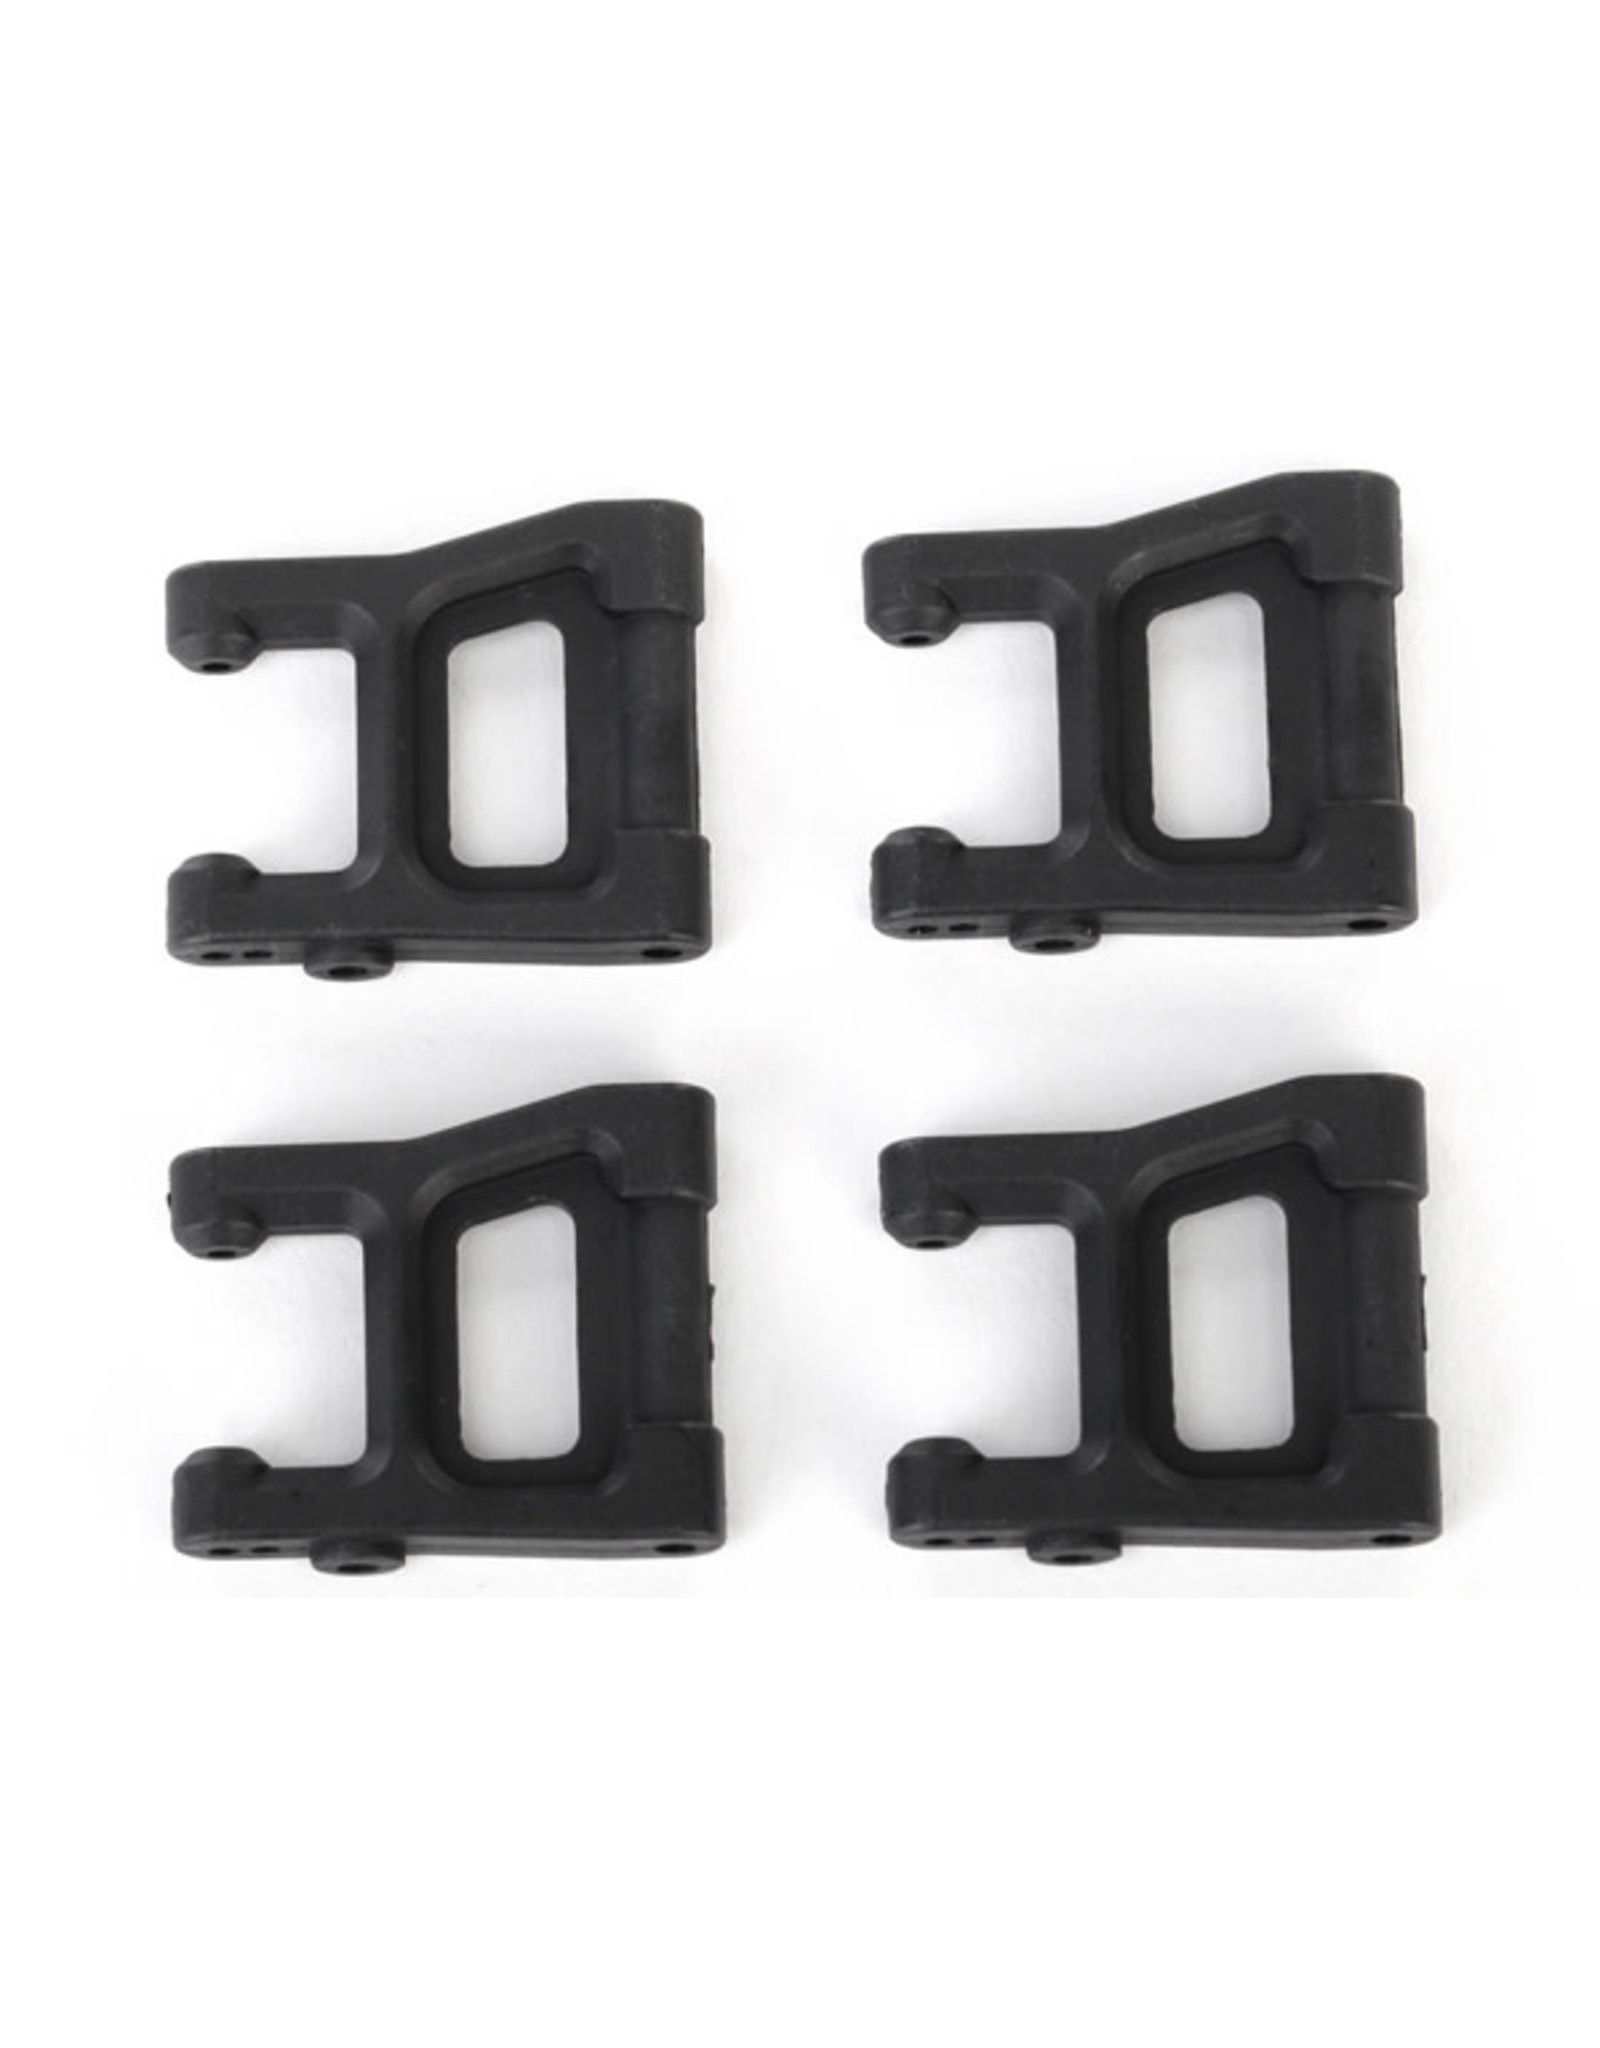 Traxxas Suspension arms, front & rear (4)